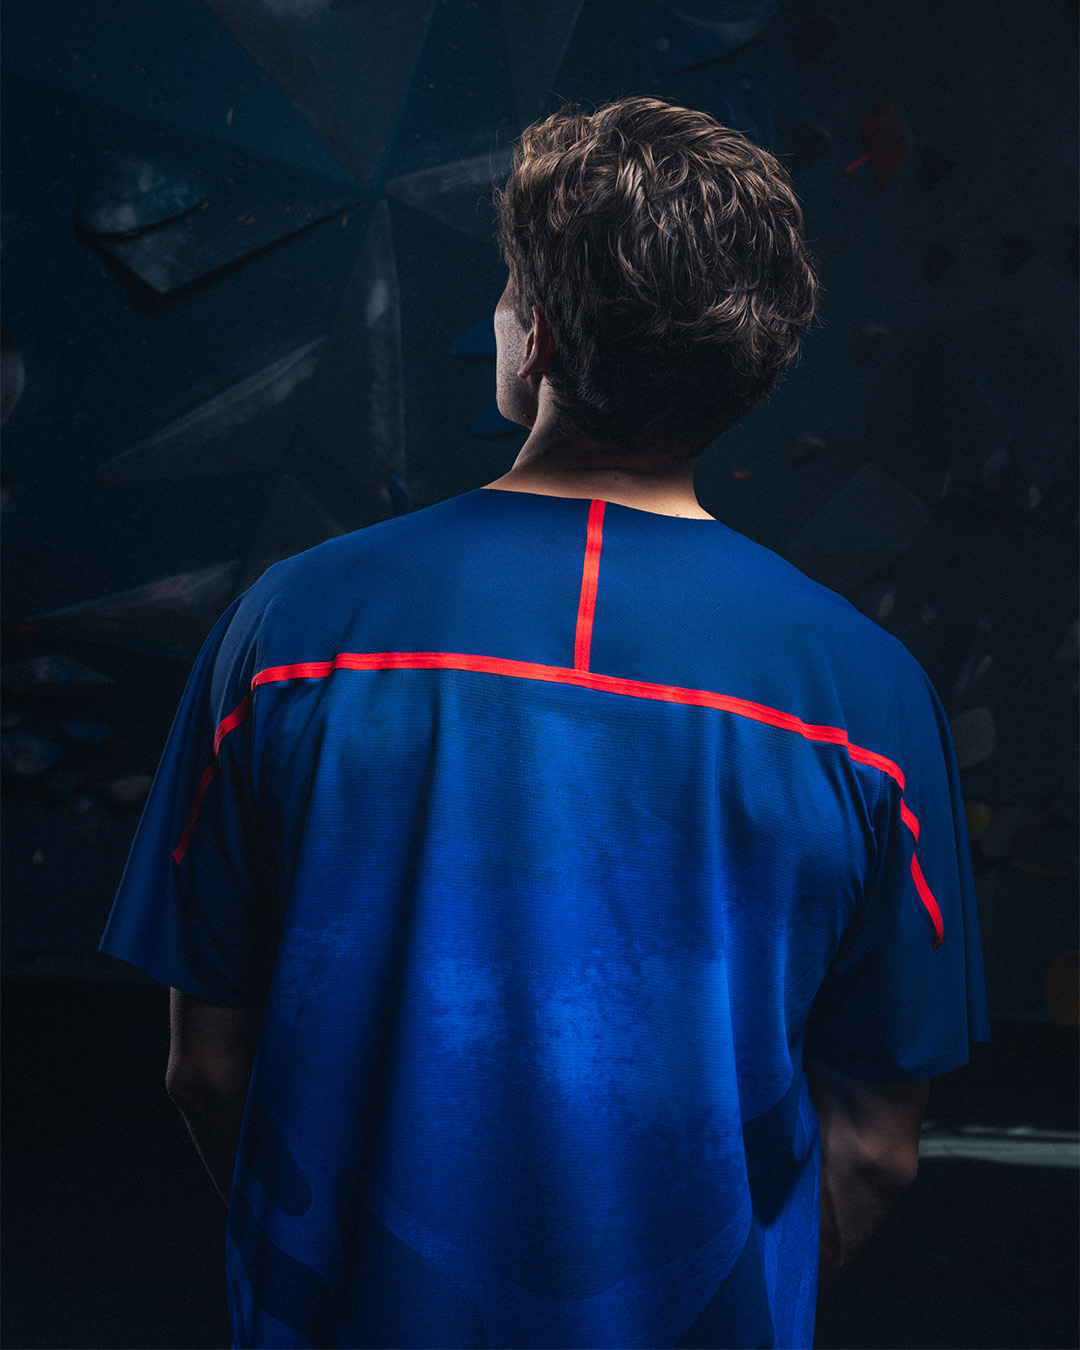 Person in a blue sport shirt with a red stripe from shoulder to shoulder, looking away, in front of a climbing wall